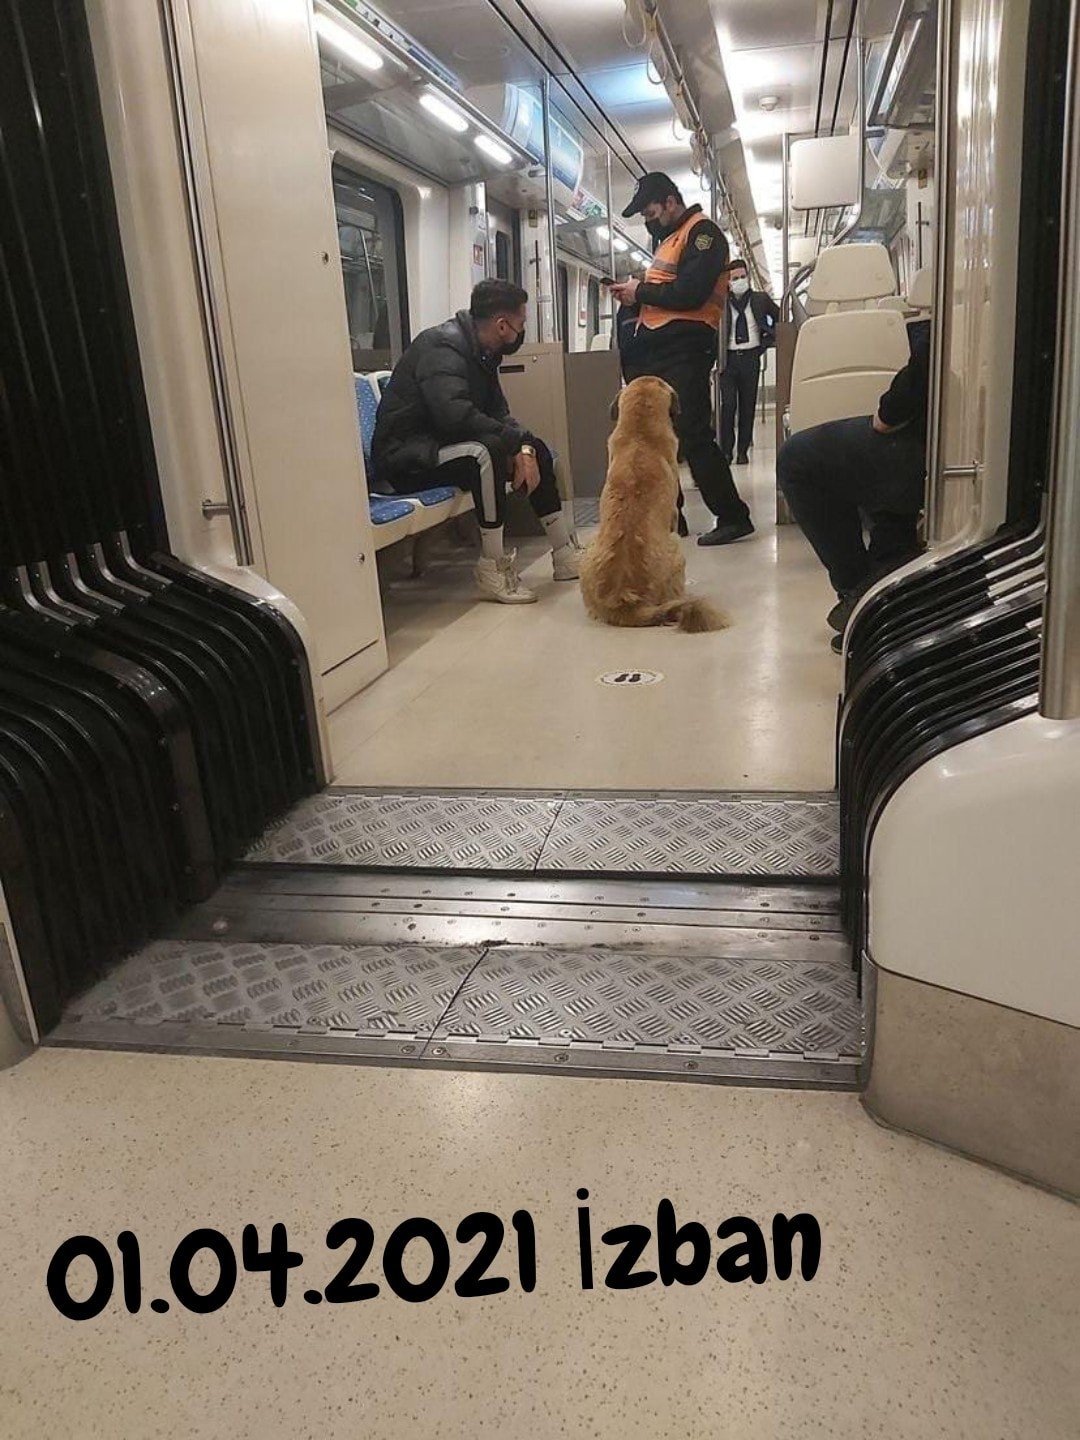 In this social media post shared on April 1, 2021, a user documents Sam the dog on the IZBAN suburban rail in Izmir, Turkey, in this image provided on April 12, 2021. (IHA Photo)